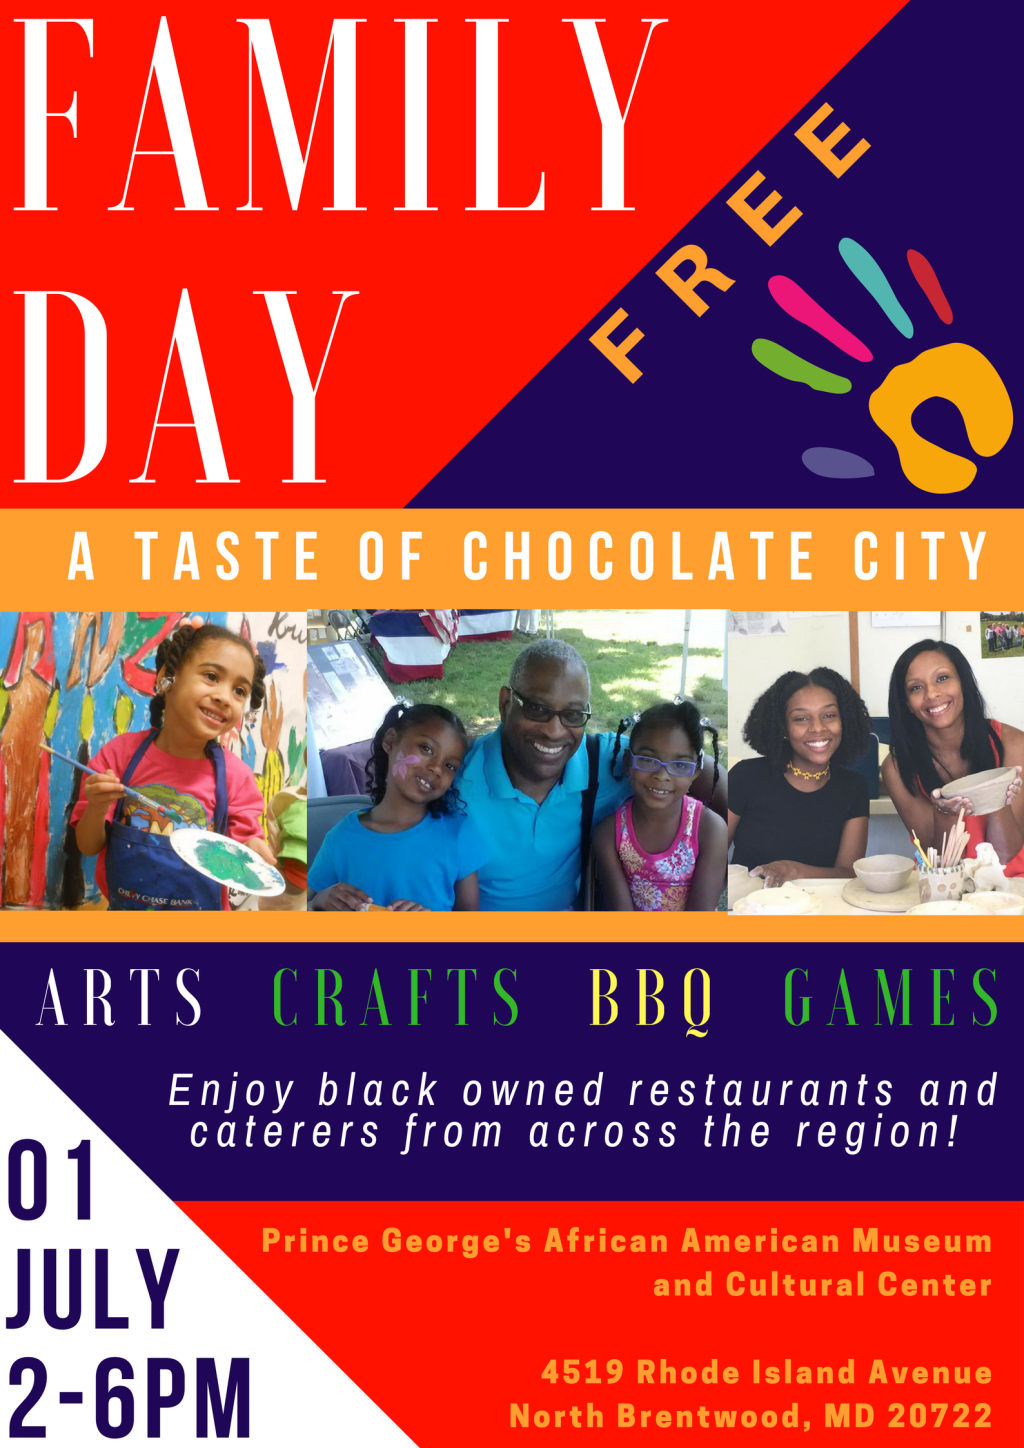 A Taste of Chocolate City Family Day